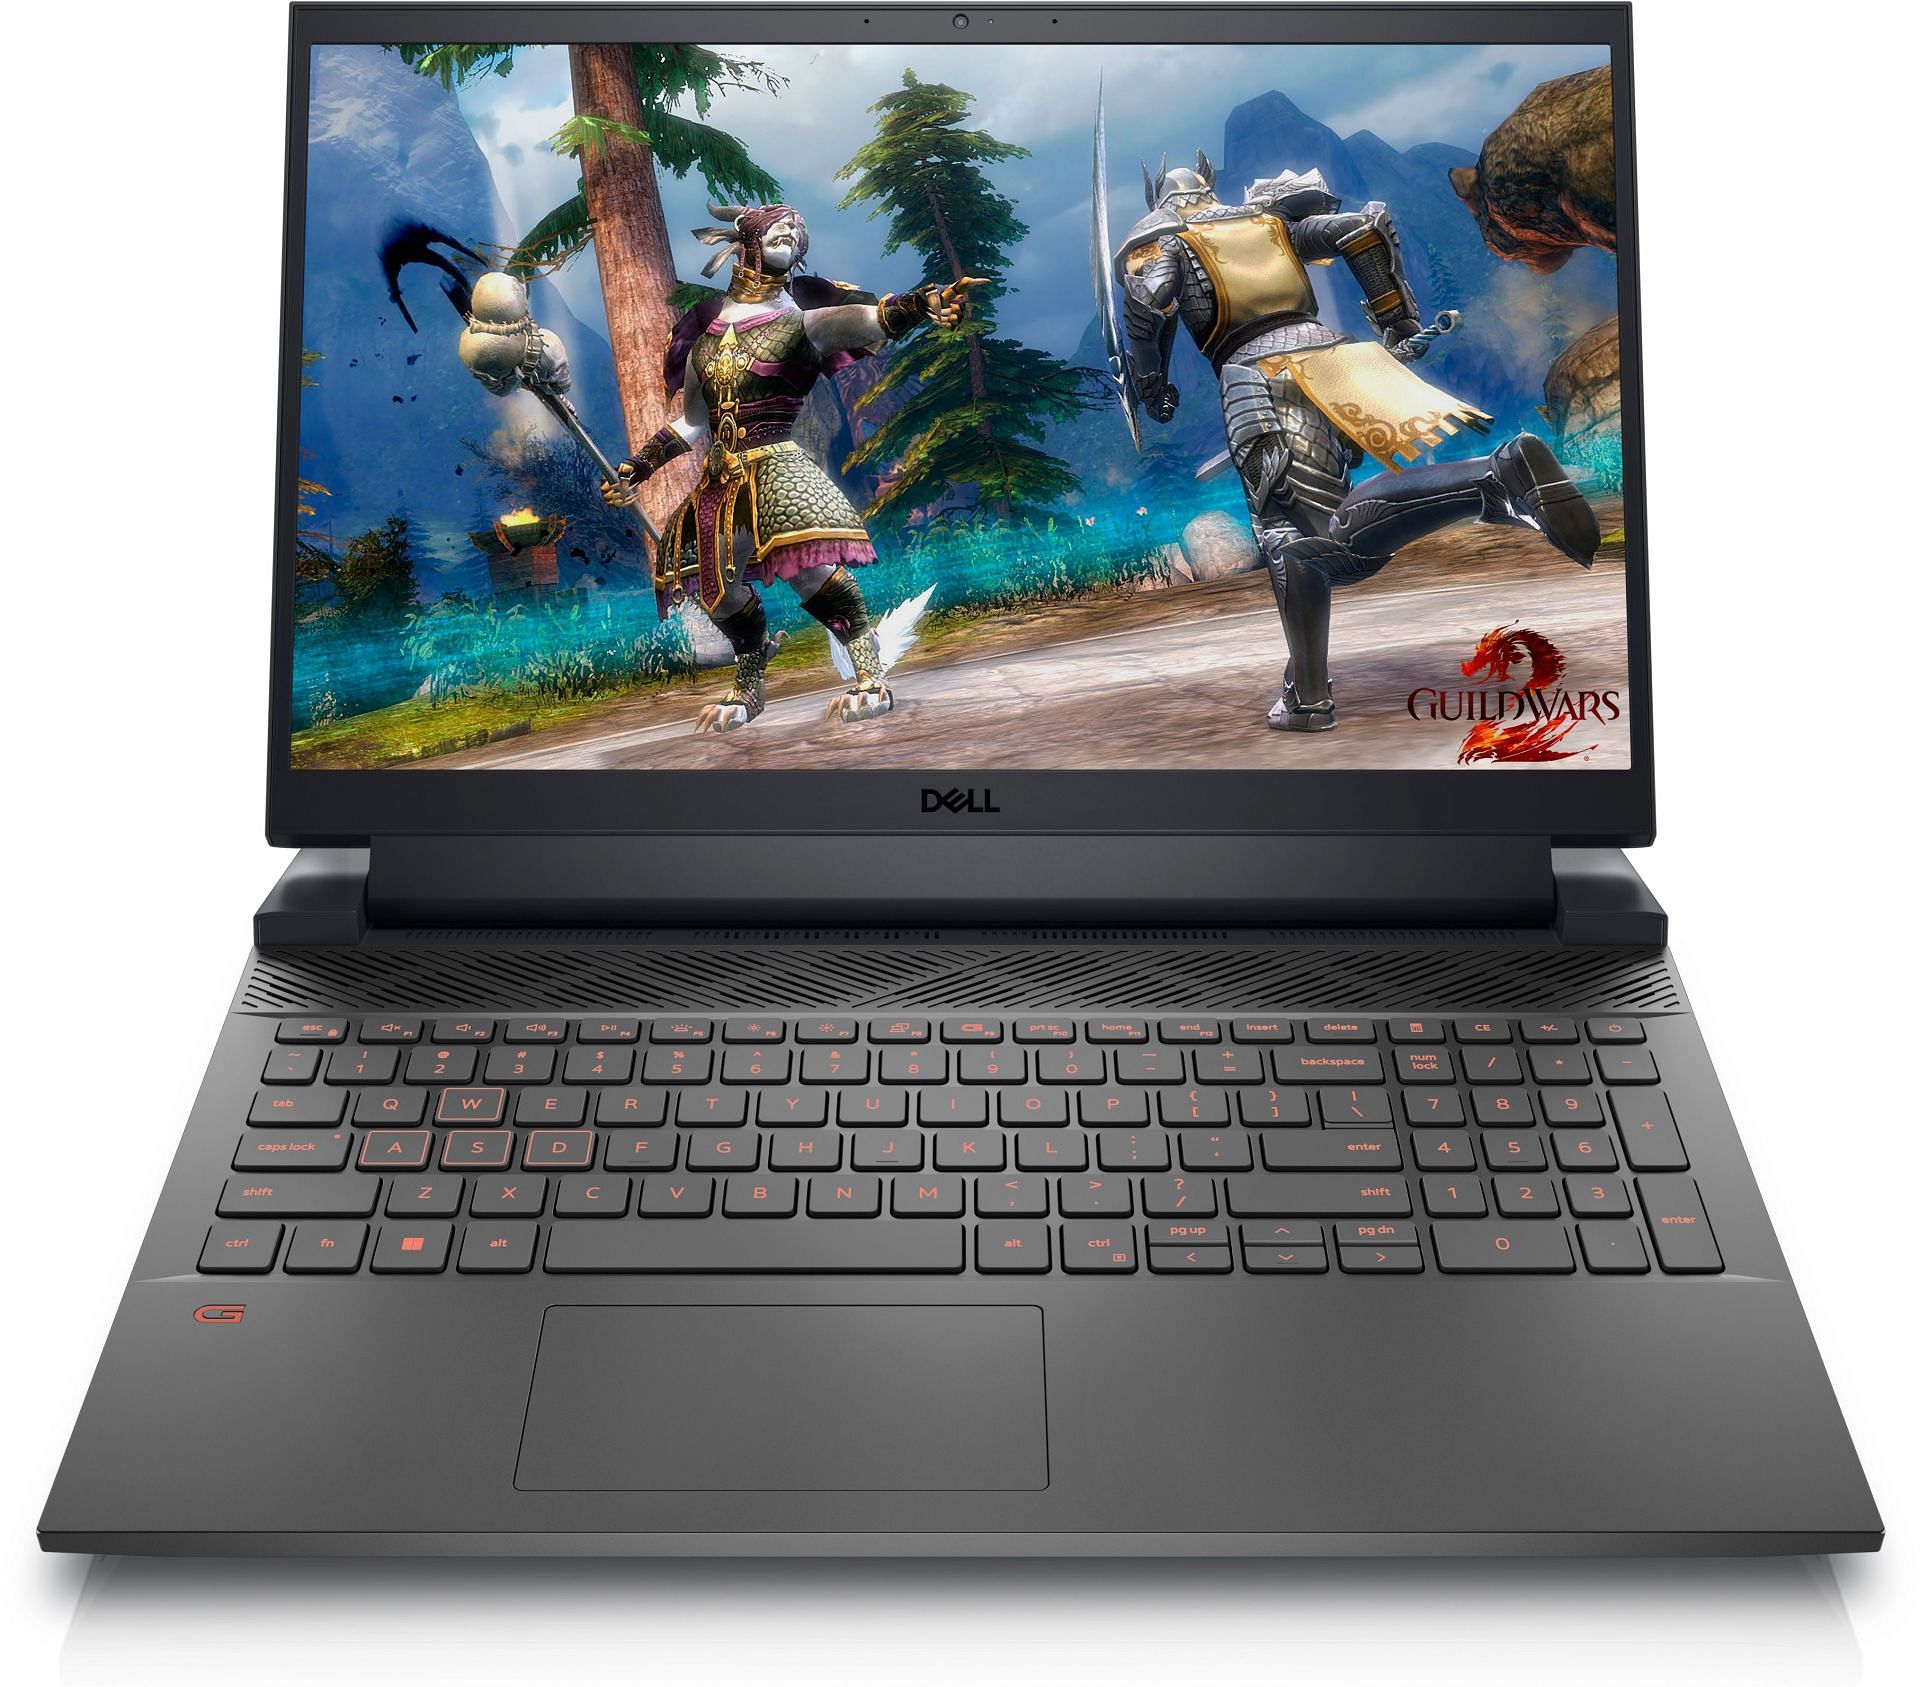 The Dell G15-5520 is available at the Amazon Great Indian Festival (Image via Dell)